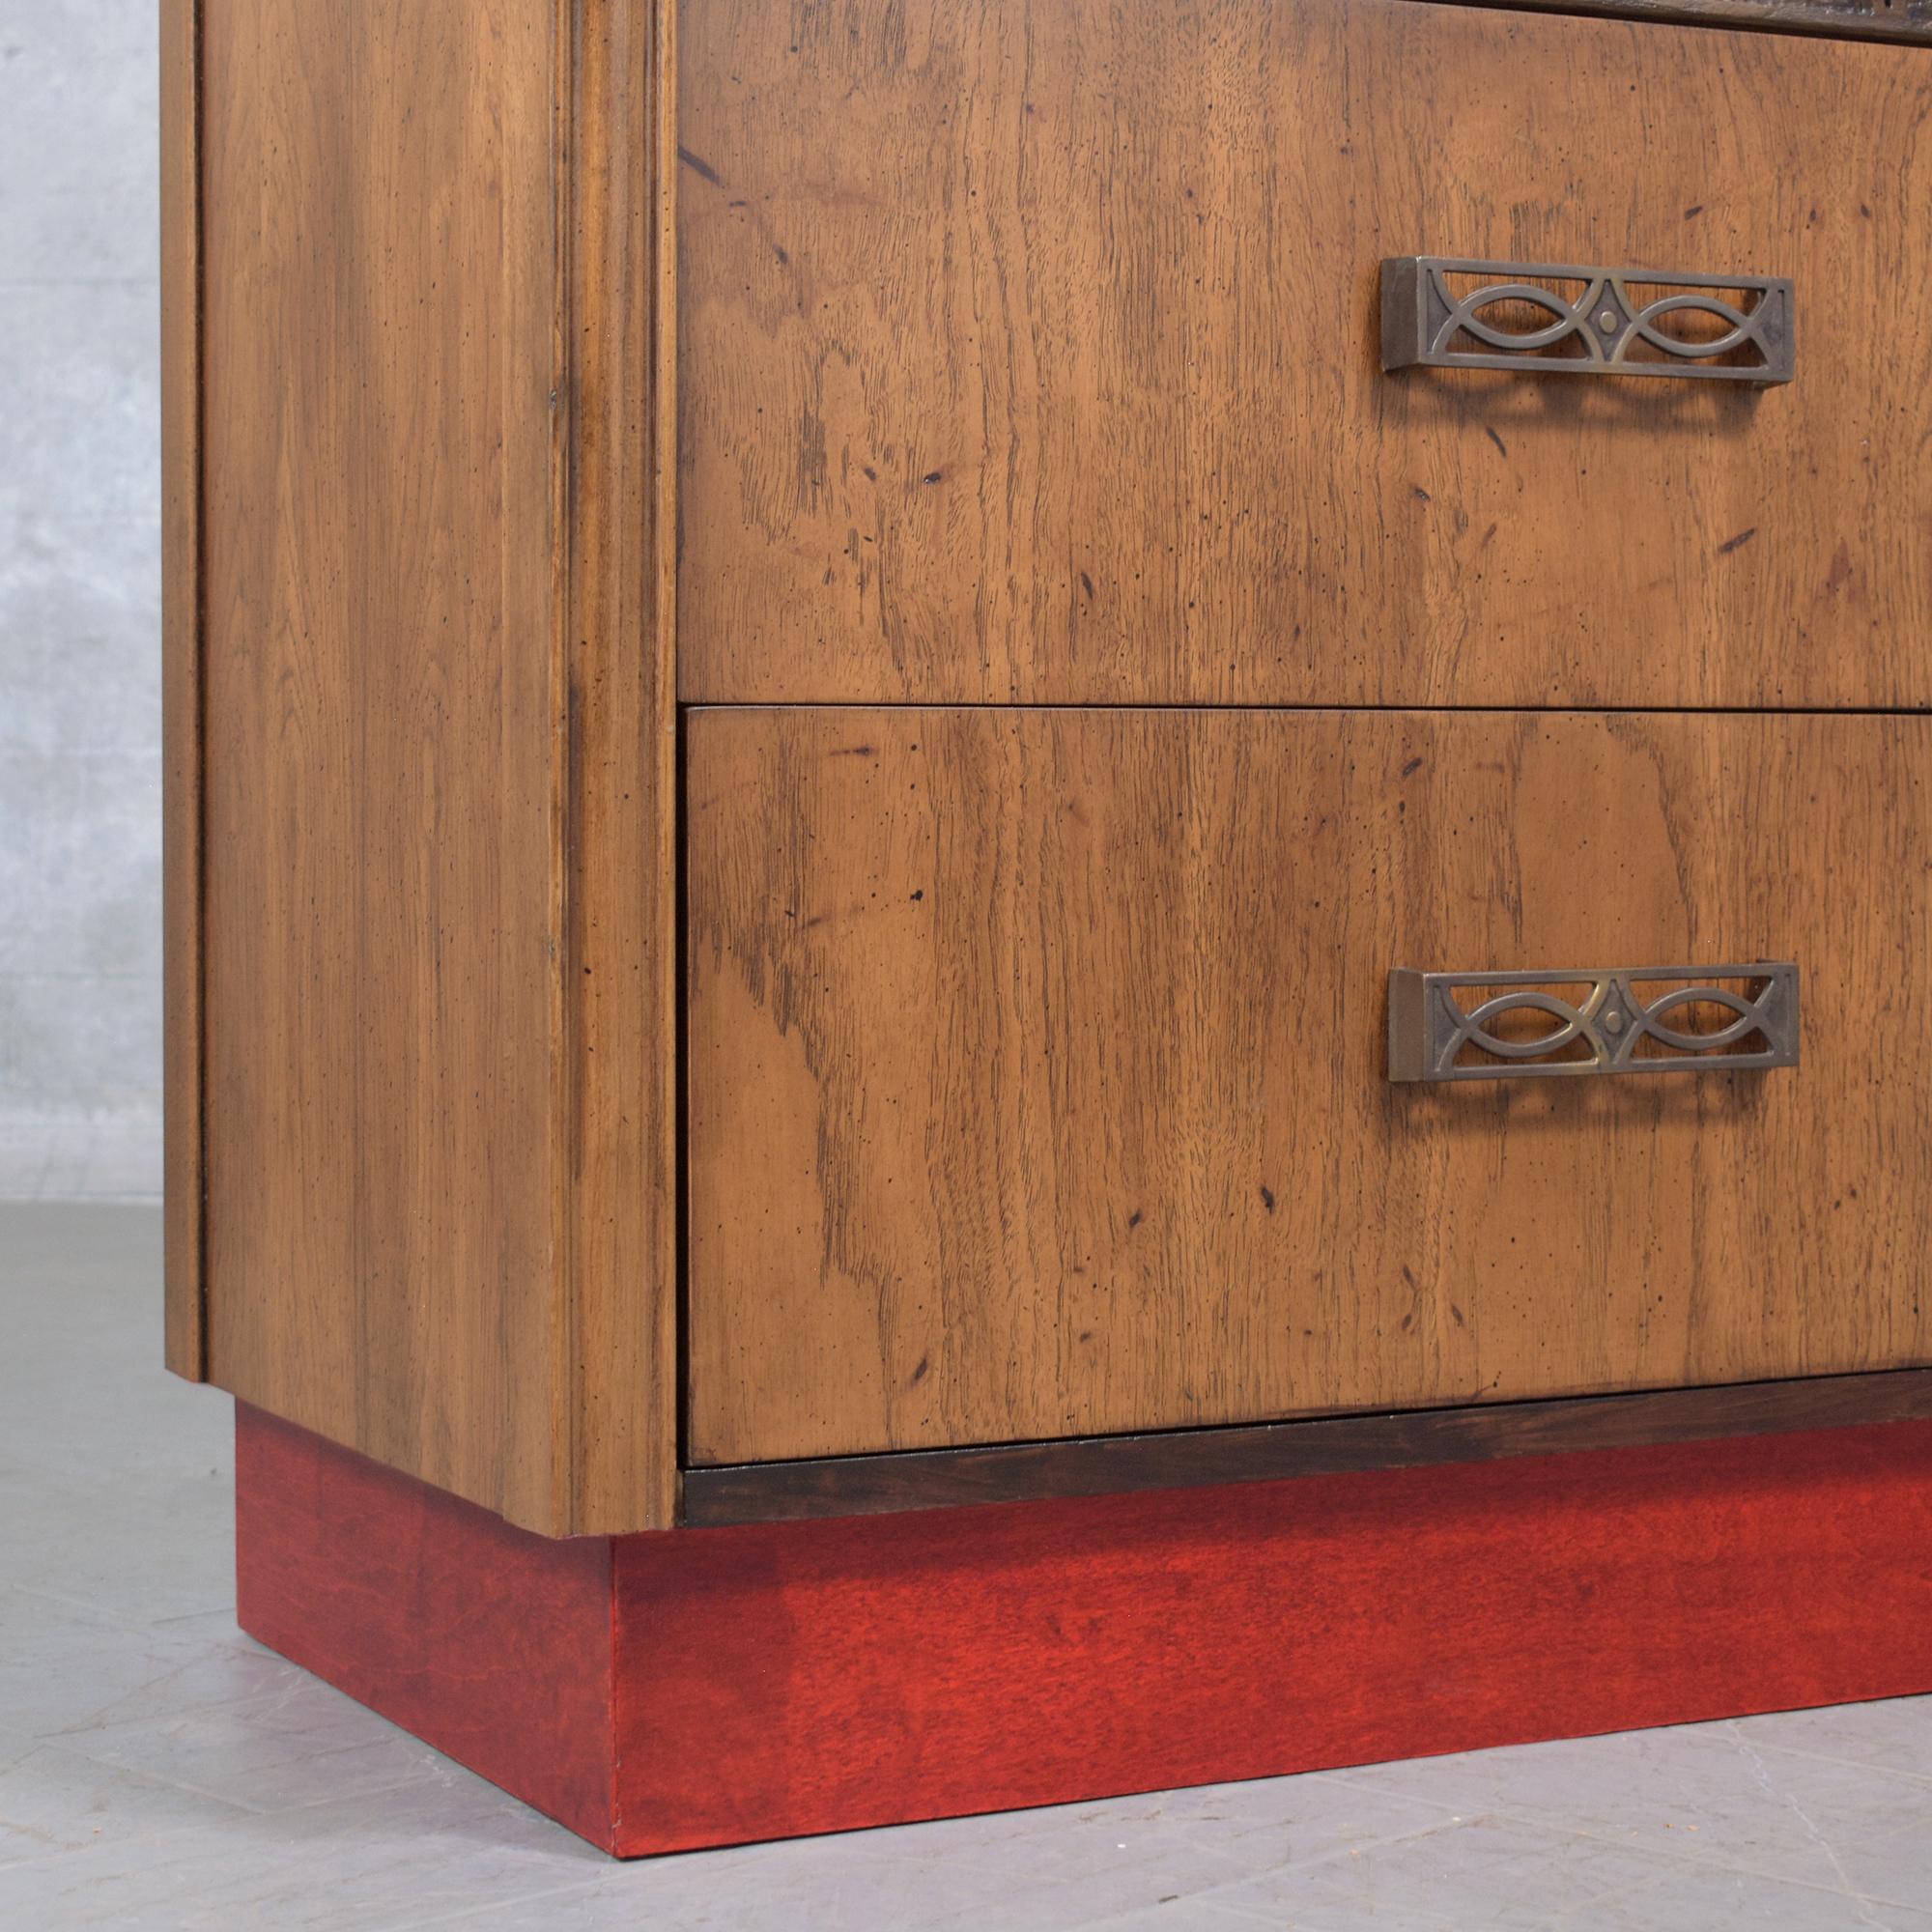 Stunning 1960s Mid-Century Modern Walnut Bachelor Chest with Sculpted Details For Sale 6